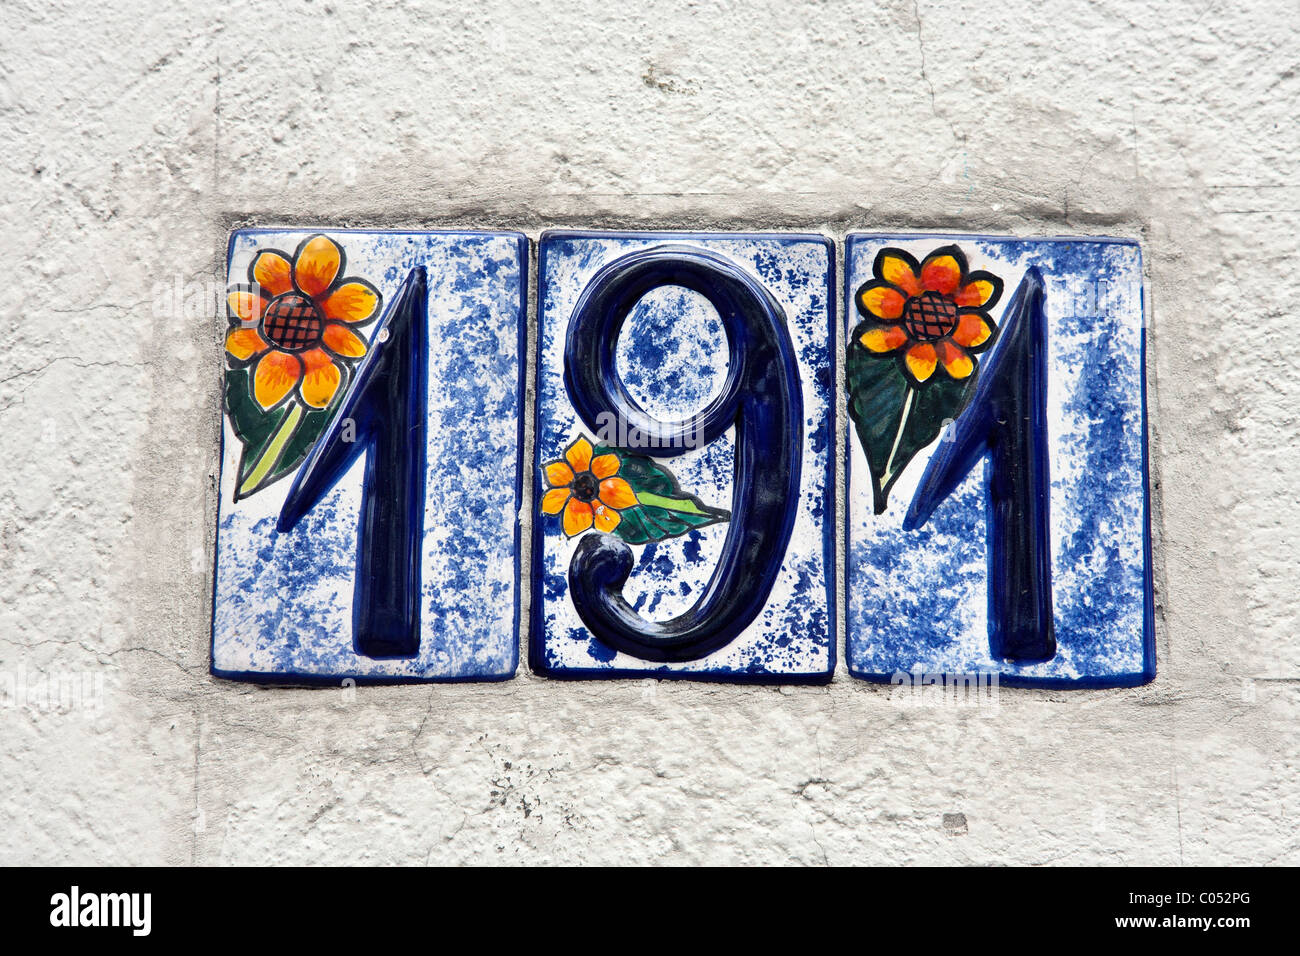 beautiful whimsical decorative glazed ceramic house number hand painted with marvelous colored floral design  Roma district Stock Photo